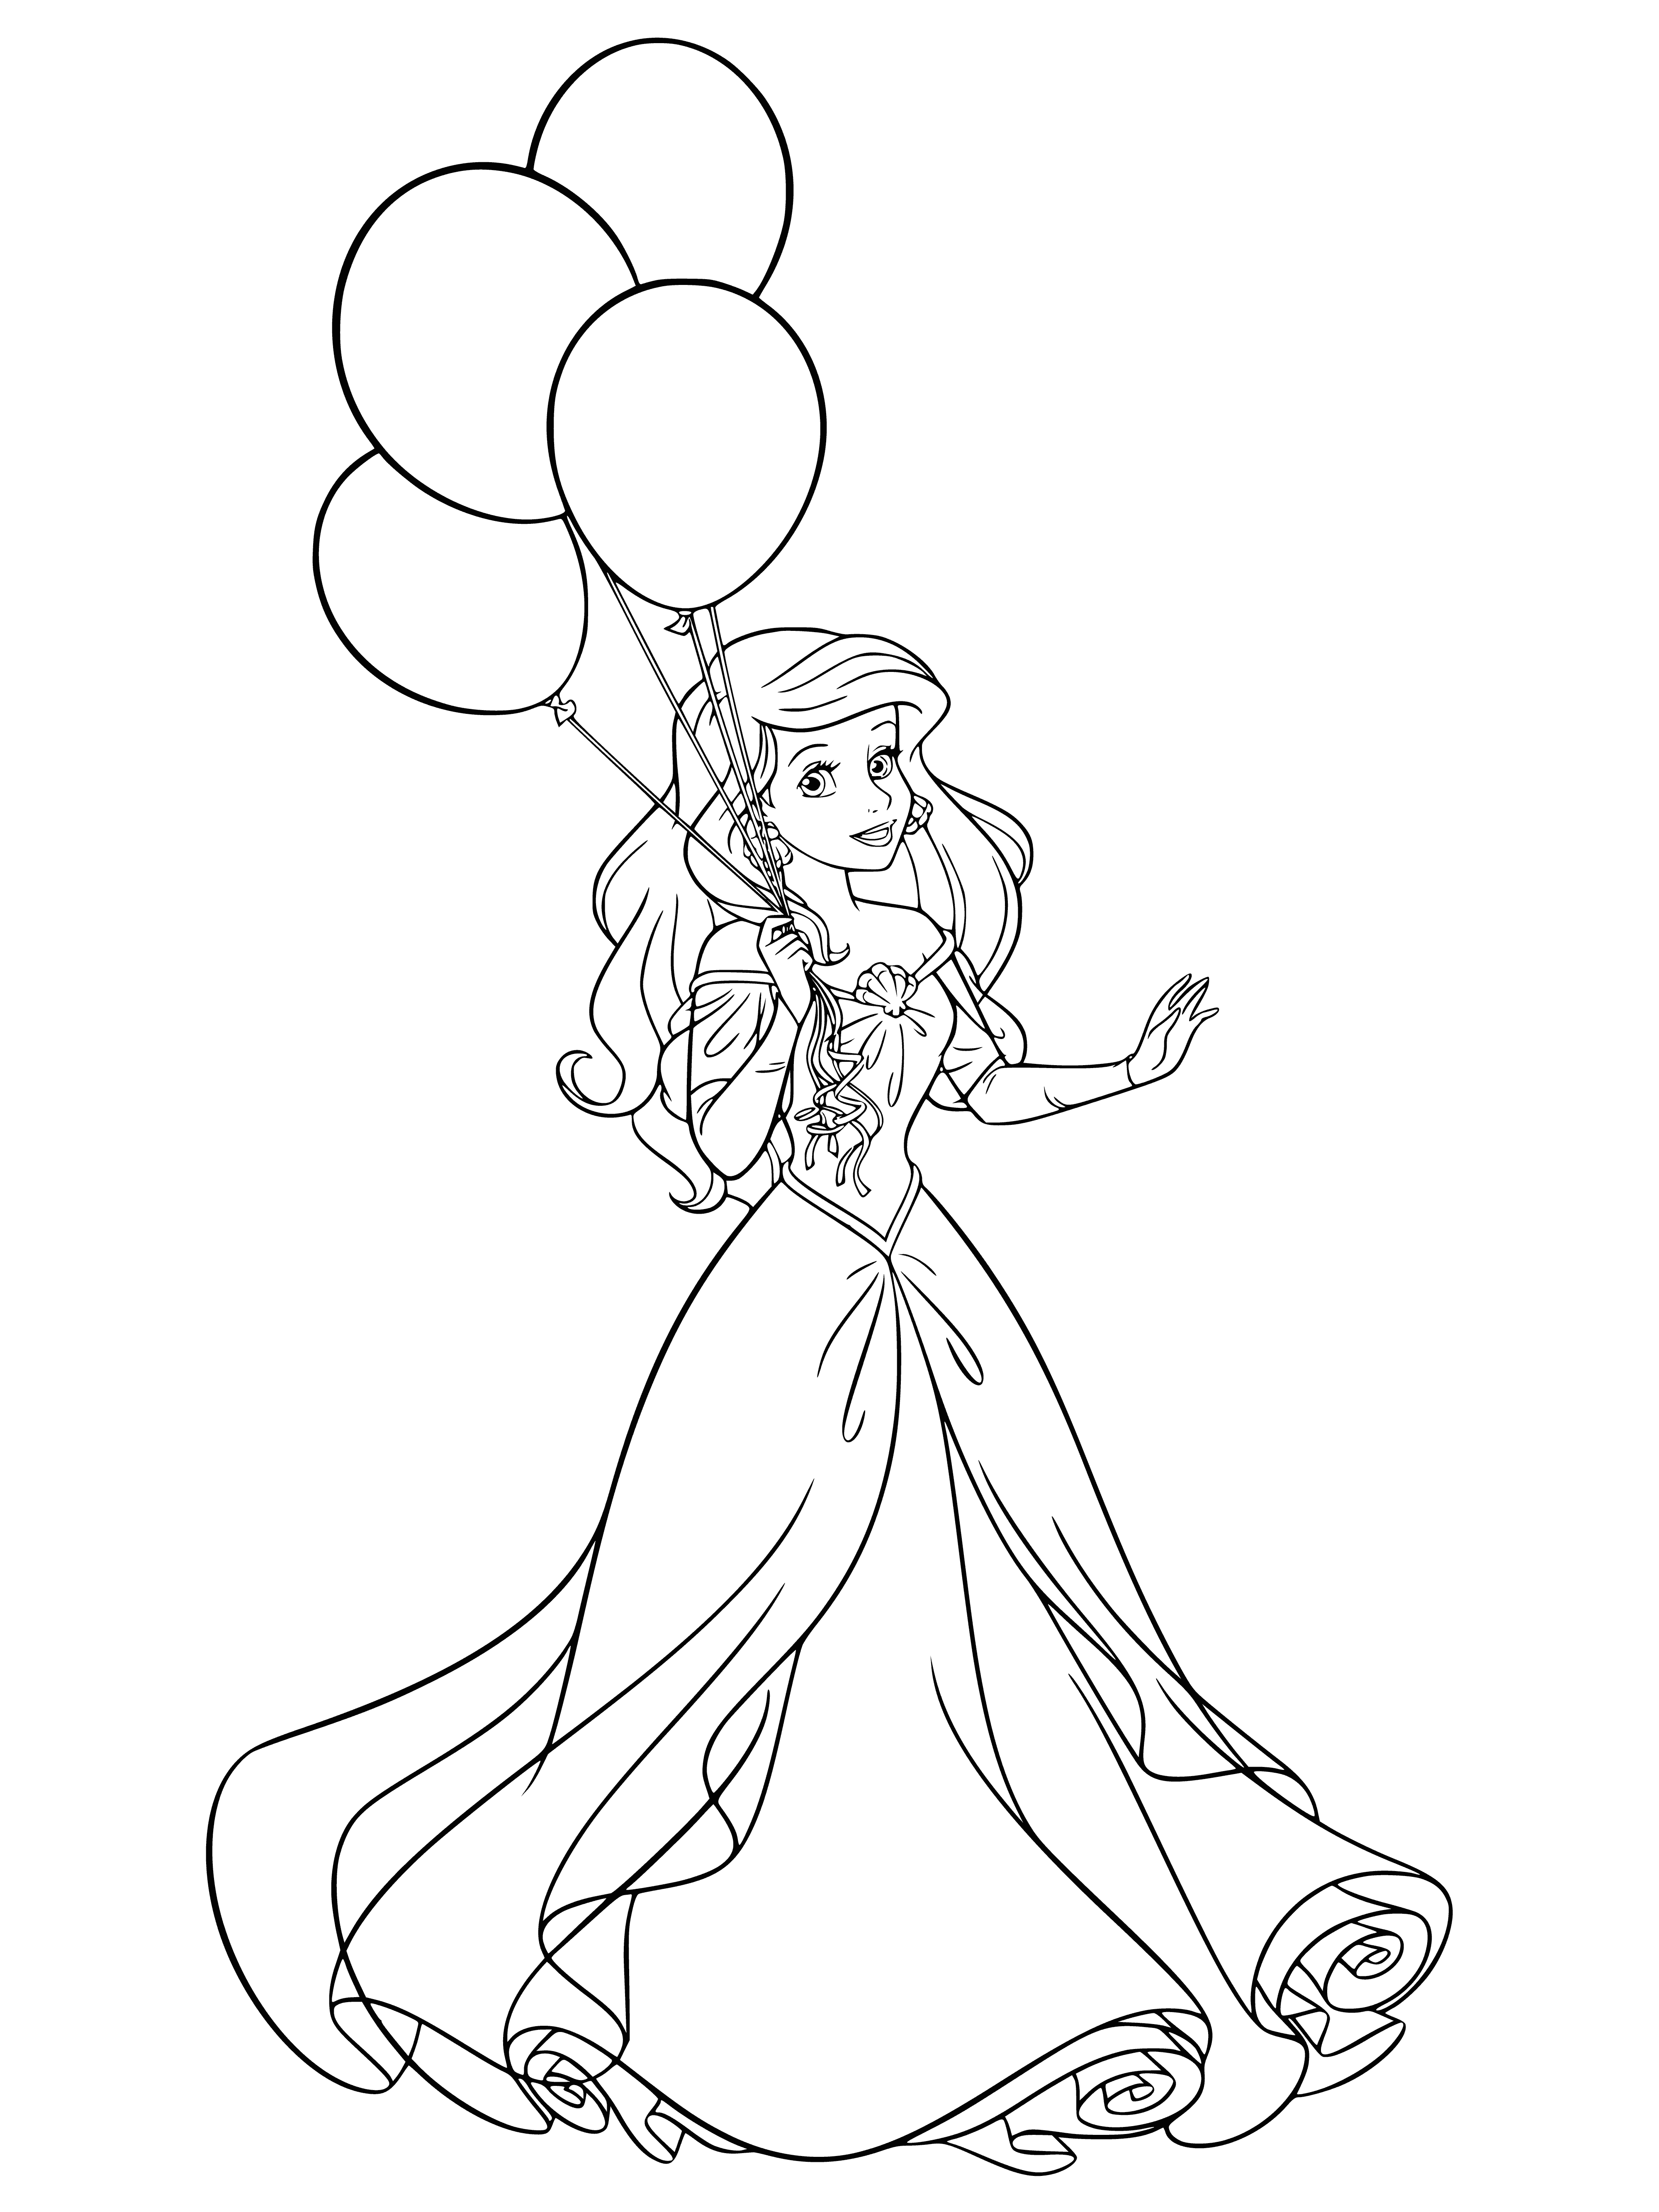 coloring page: Mermaid floats with balloons, her purple tail and long hair flowing in the water.